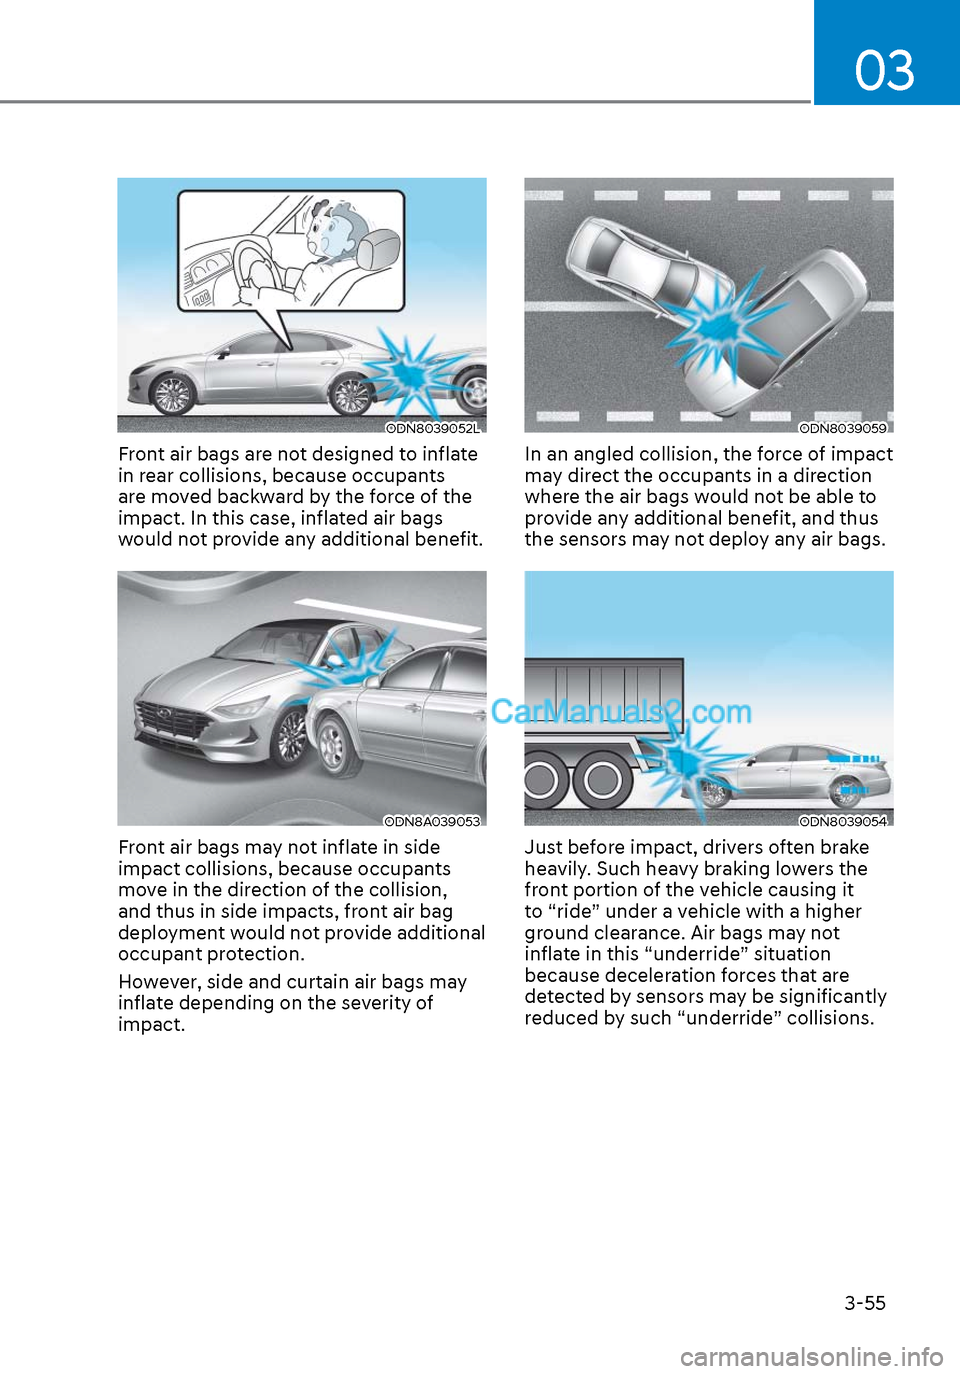 Hyundai Sonata 2020 Manual Online 03
3-55
ODN8039052LODN8039052L
Front air bags are not designed to inflate 
in rear collisions, because occupants 
are moved backward by the force of the 
impact. In this case, inflated air bags 
would